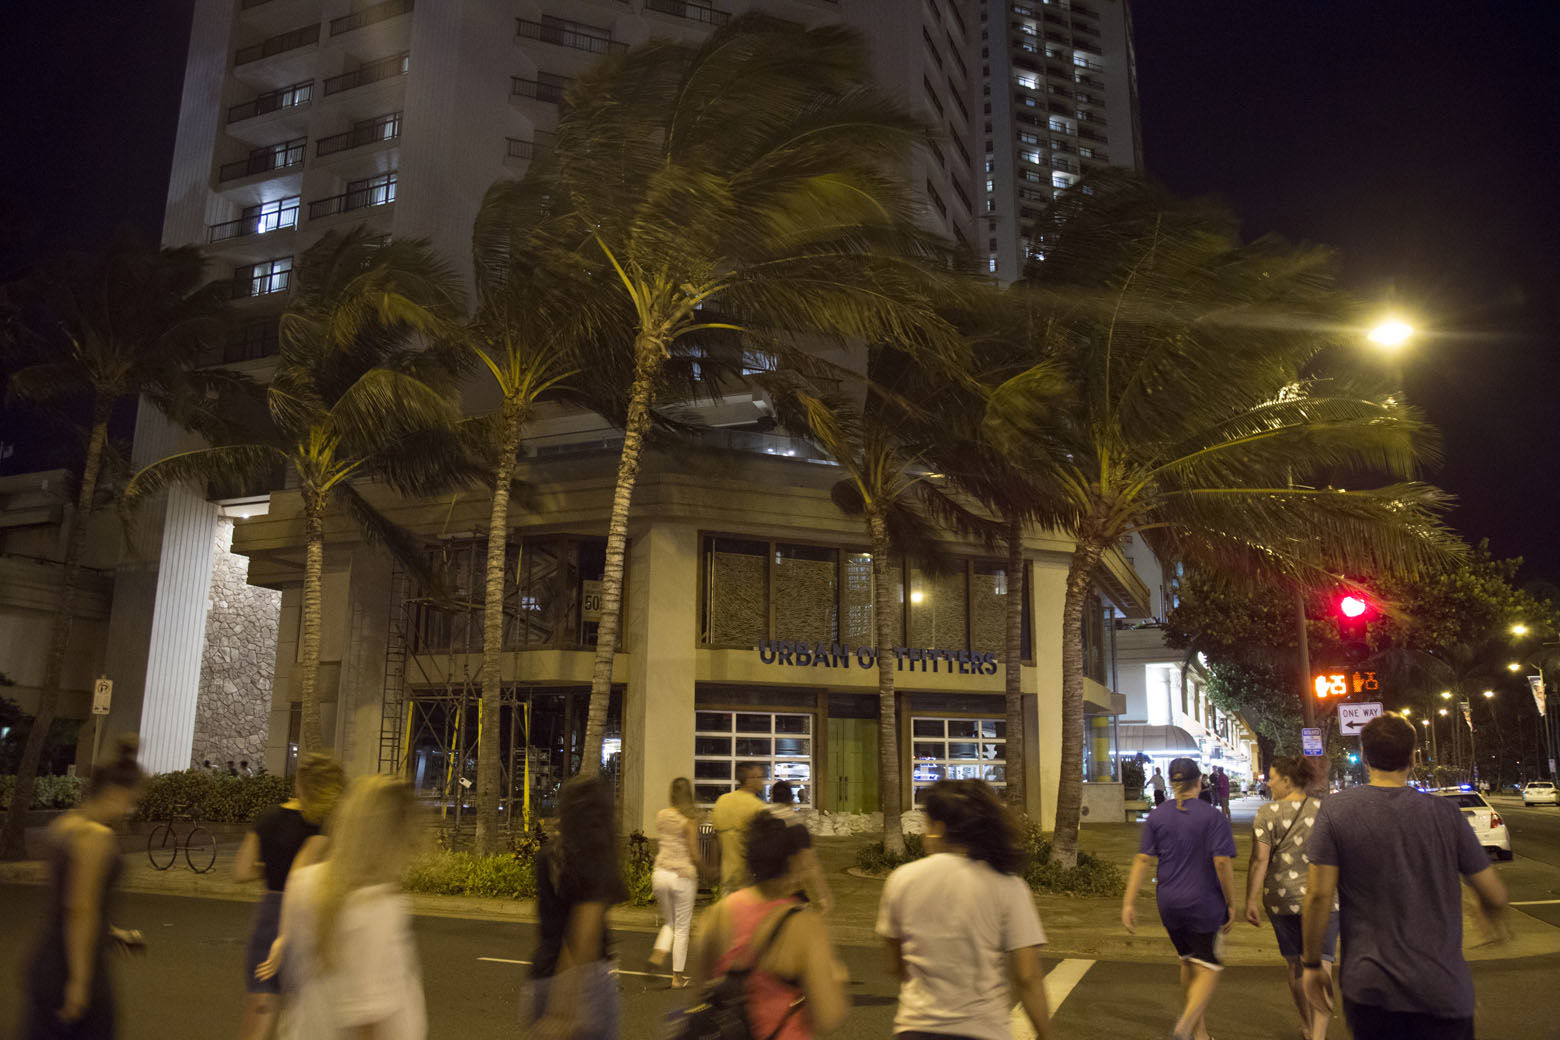 HONOLULU, HI - AUGUST 23: 2018   Fewer than the normal amount of nightly tourists stroll the streets of Waikiki as Hurricane Lane approaches Waikiki Beach on Thursday, August 23, 2018 in Honolulu, Hi.   (Photo by Kat Wade/Getty Images)